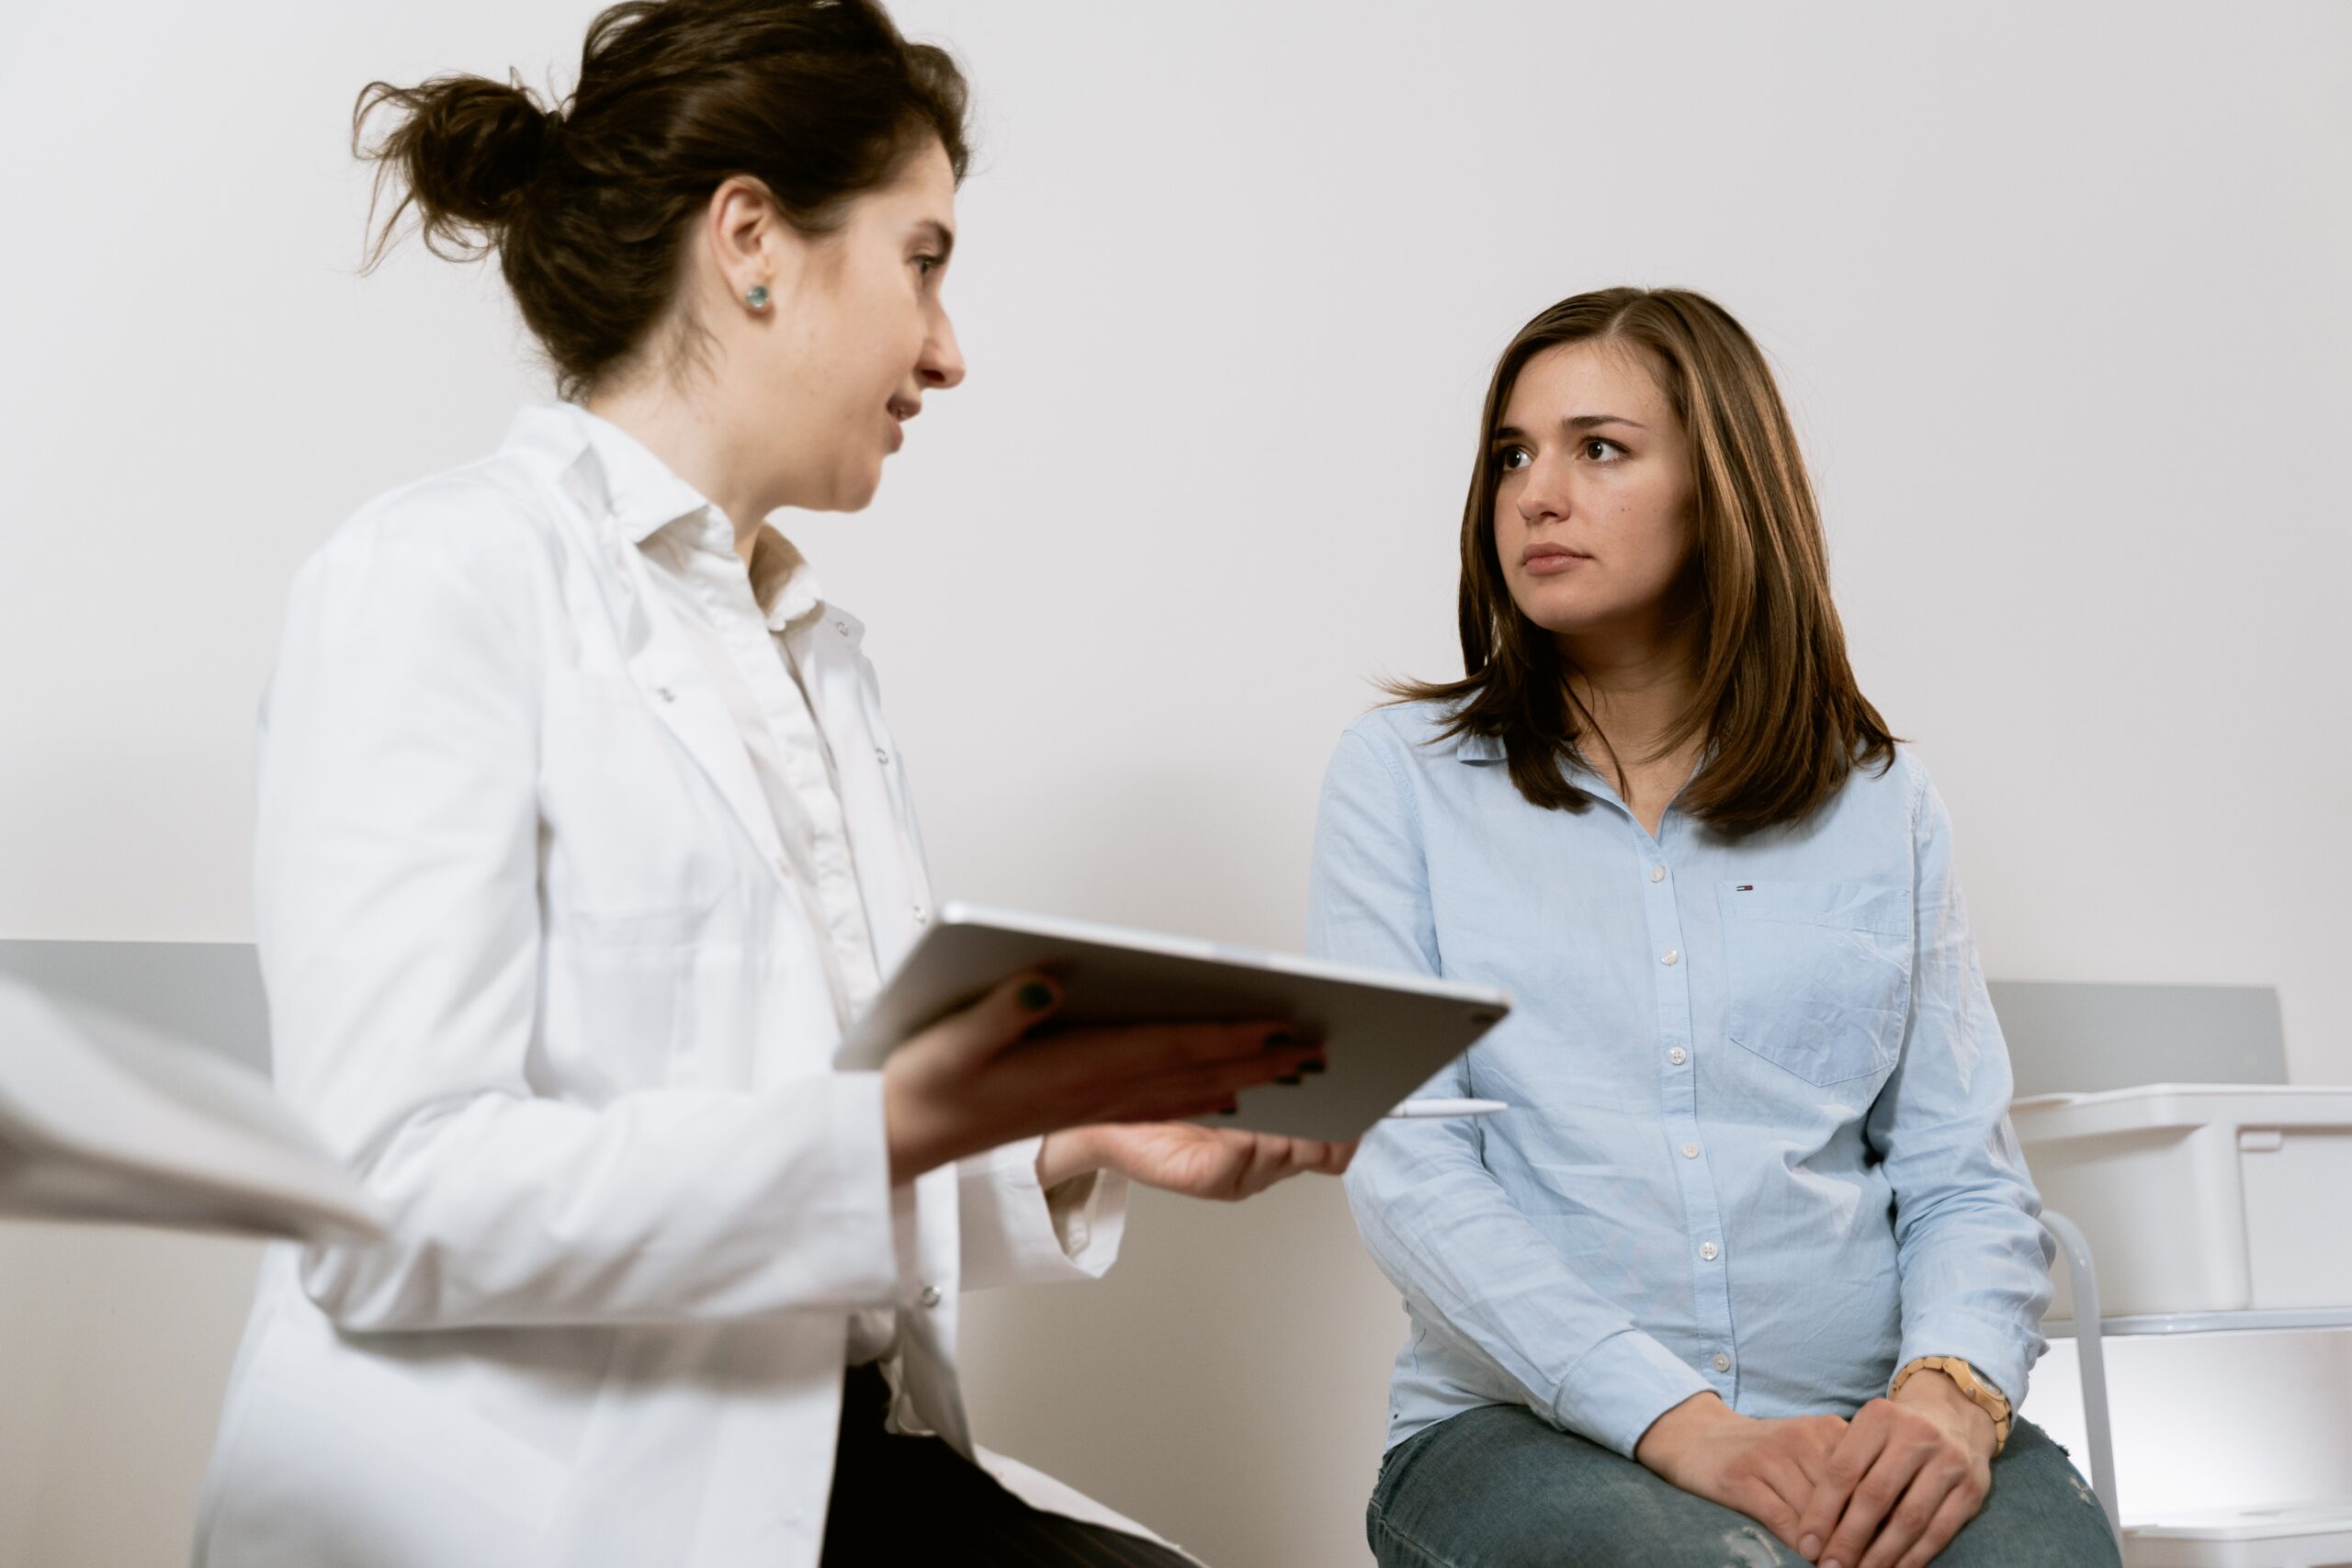 Female patient being consulted by a doctor